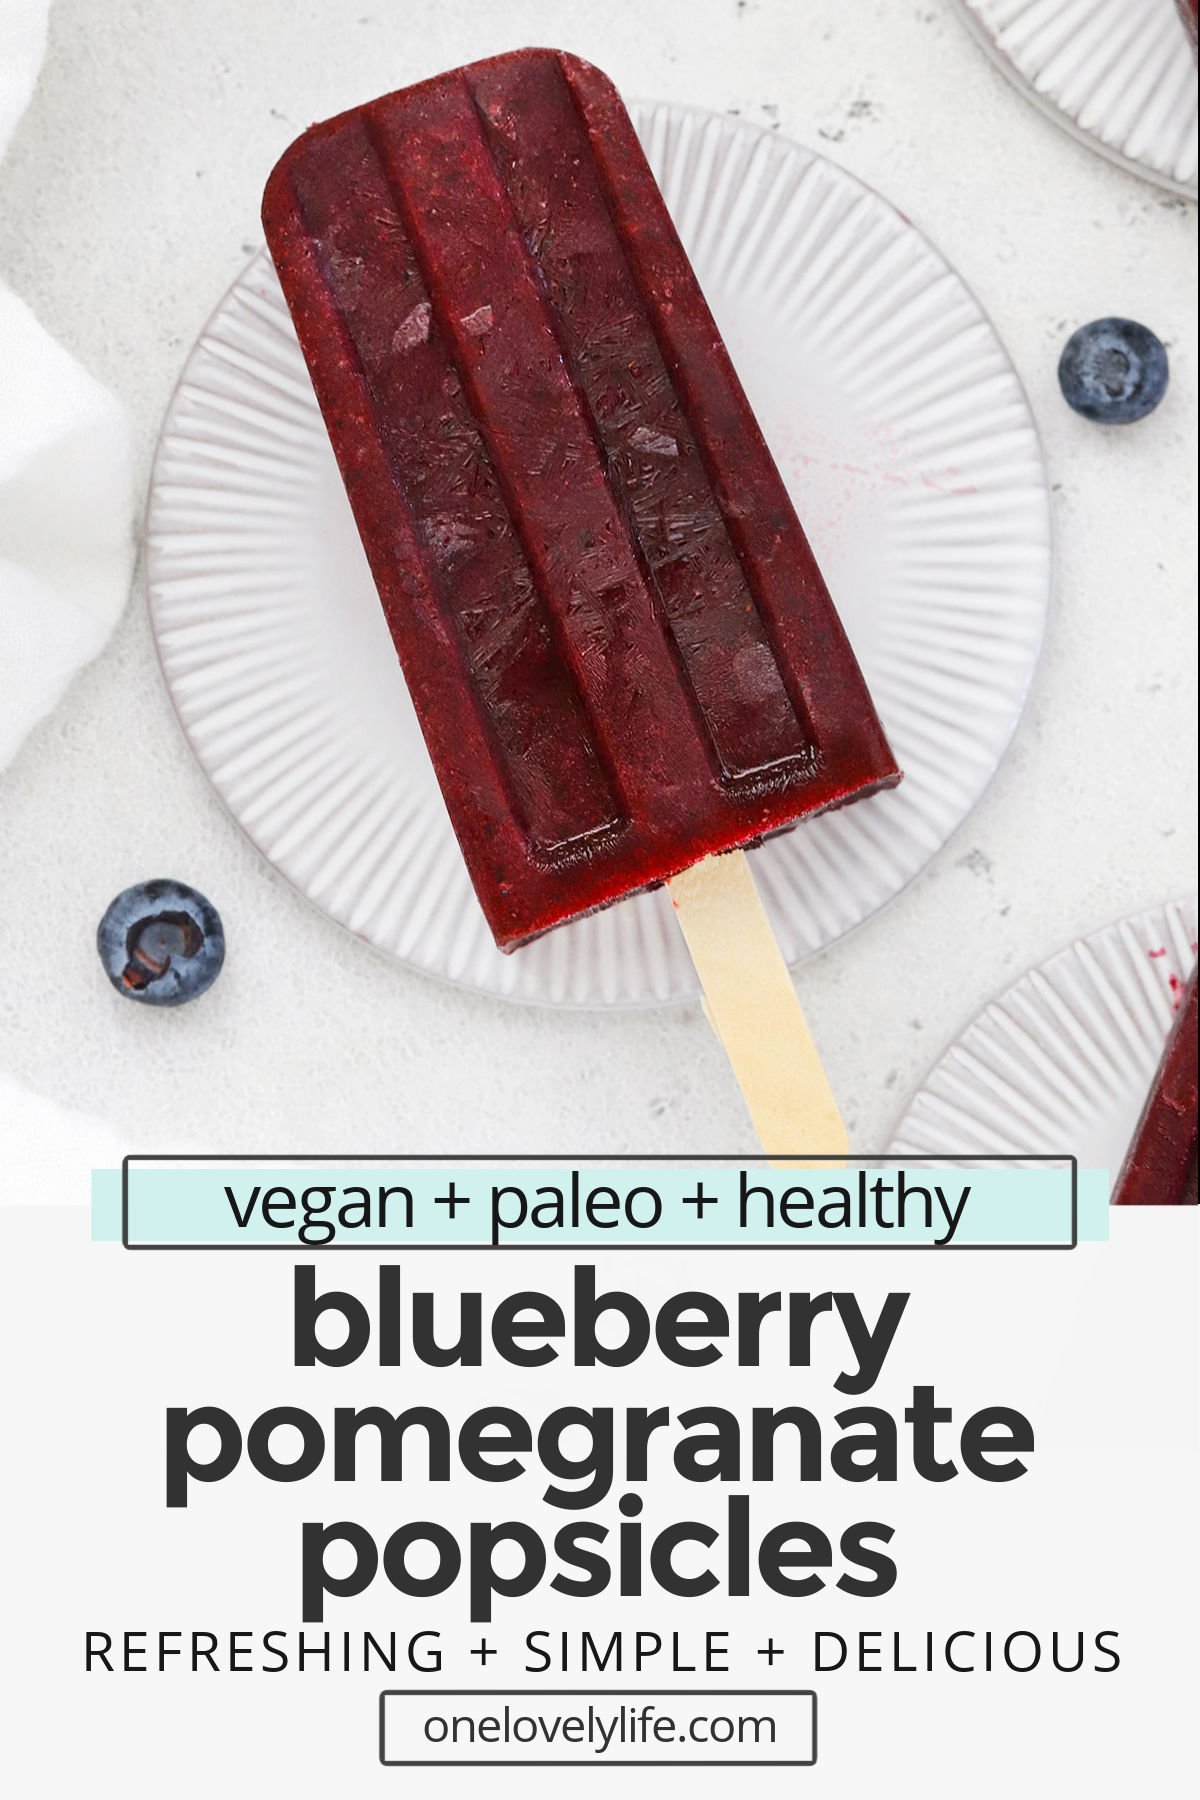 Blueberry Pomegranate Popsicles - These healthy blueberry popsicles are made of 100% fruit and have a creamy sorbet-like texture you'll fall in love with! // Blueberry Popsicles No Sugar // Blueberry Popsicles Without Yogurt // Homemade Blueberry Popsicles // pomegranate popsicles // berry popsicles // healthy popsicles